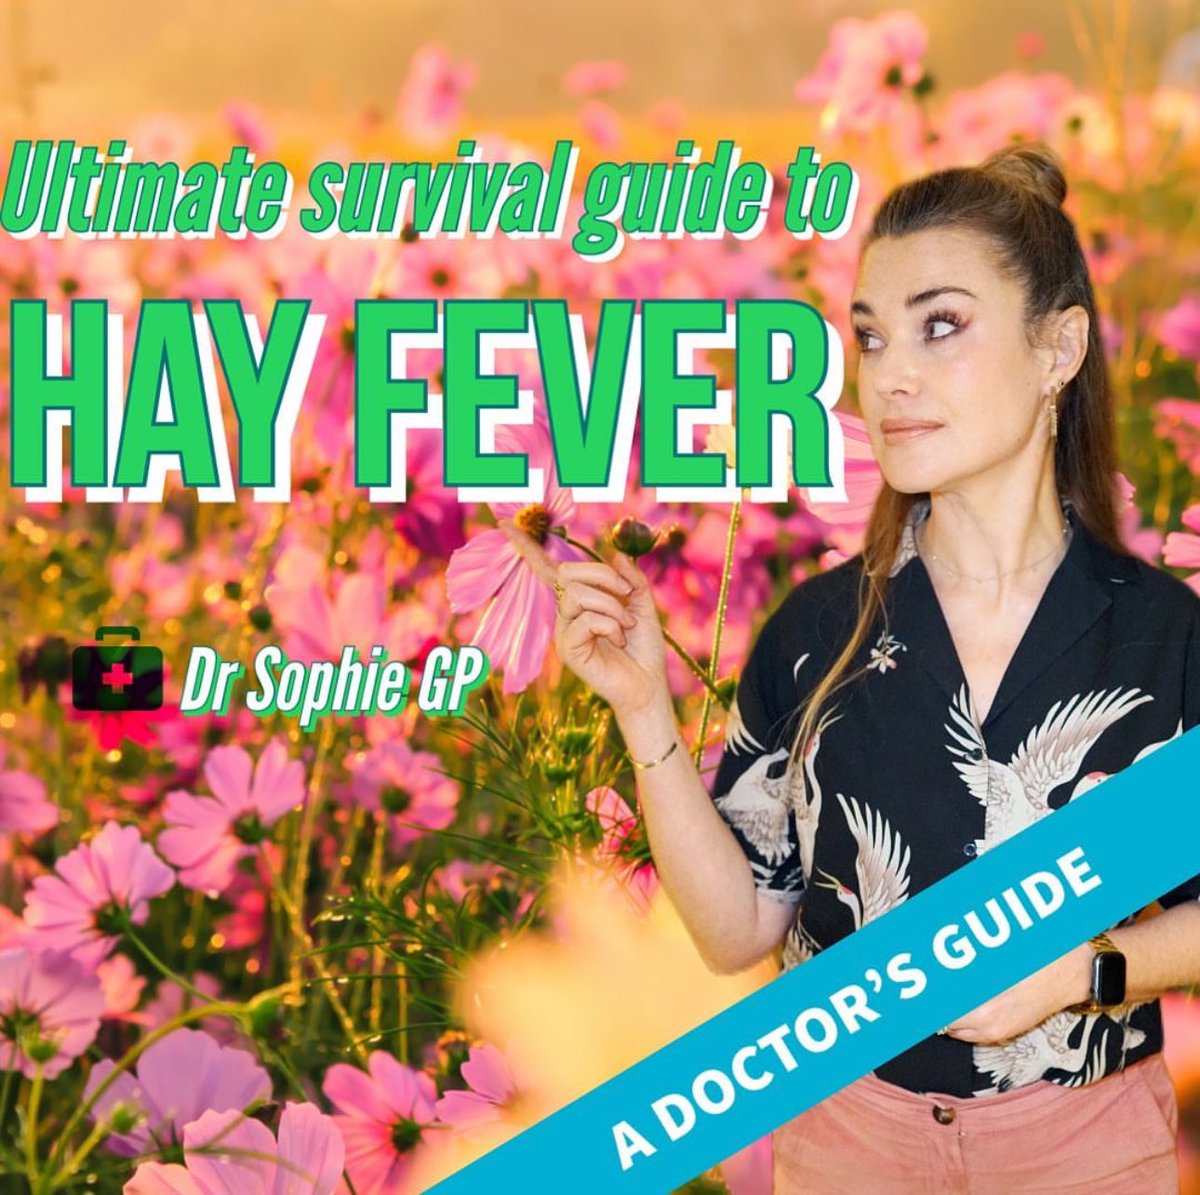 It’s that time of year again! Here’s my video with loads of advice (clinicians: this is v useful to text to patients) BEAT THE SNEEZES: Ultimate Hay Fever Guide youtu.be/Saxy4r0Qet4